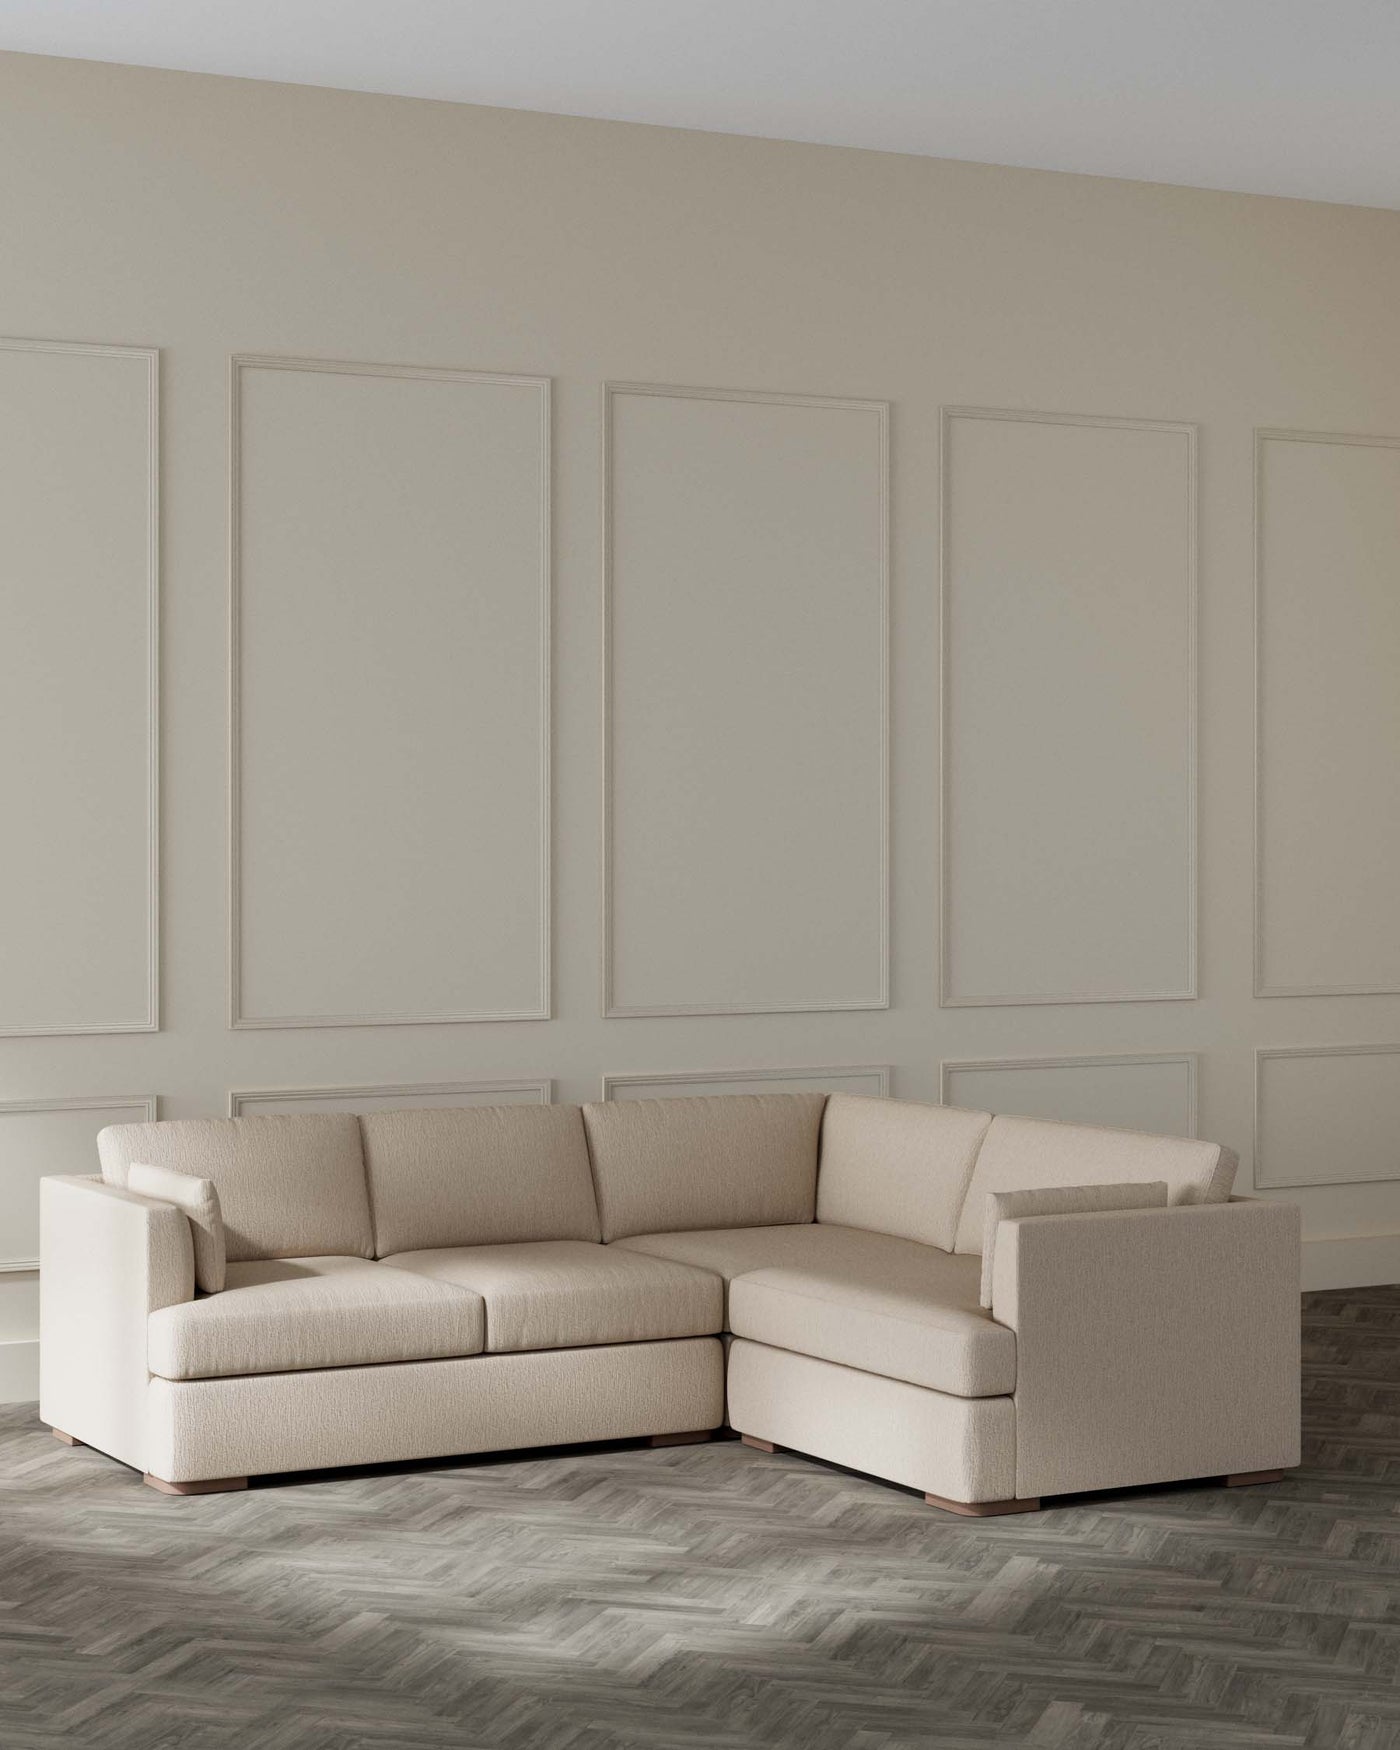 Beige modern corner sectional couch in a minimalist style room with panelled walls and herringbone pattern wood floor.